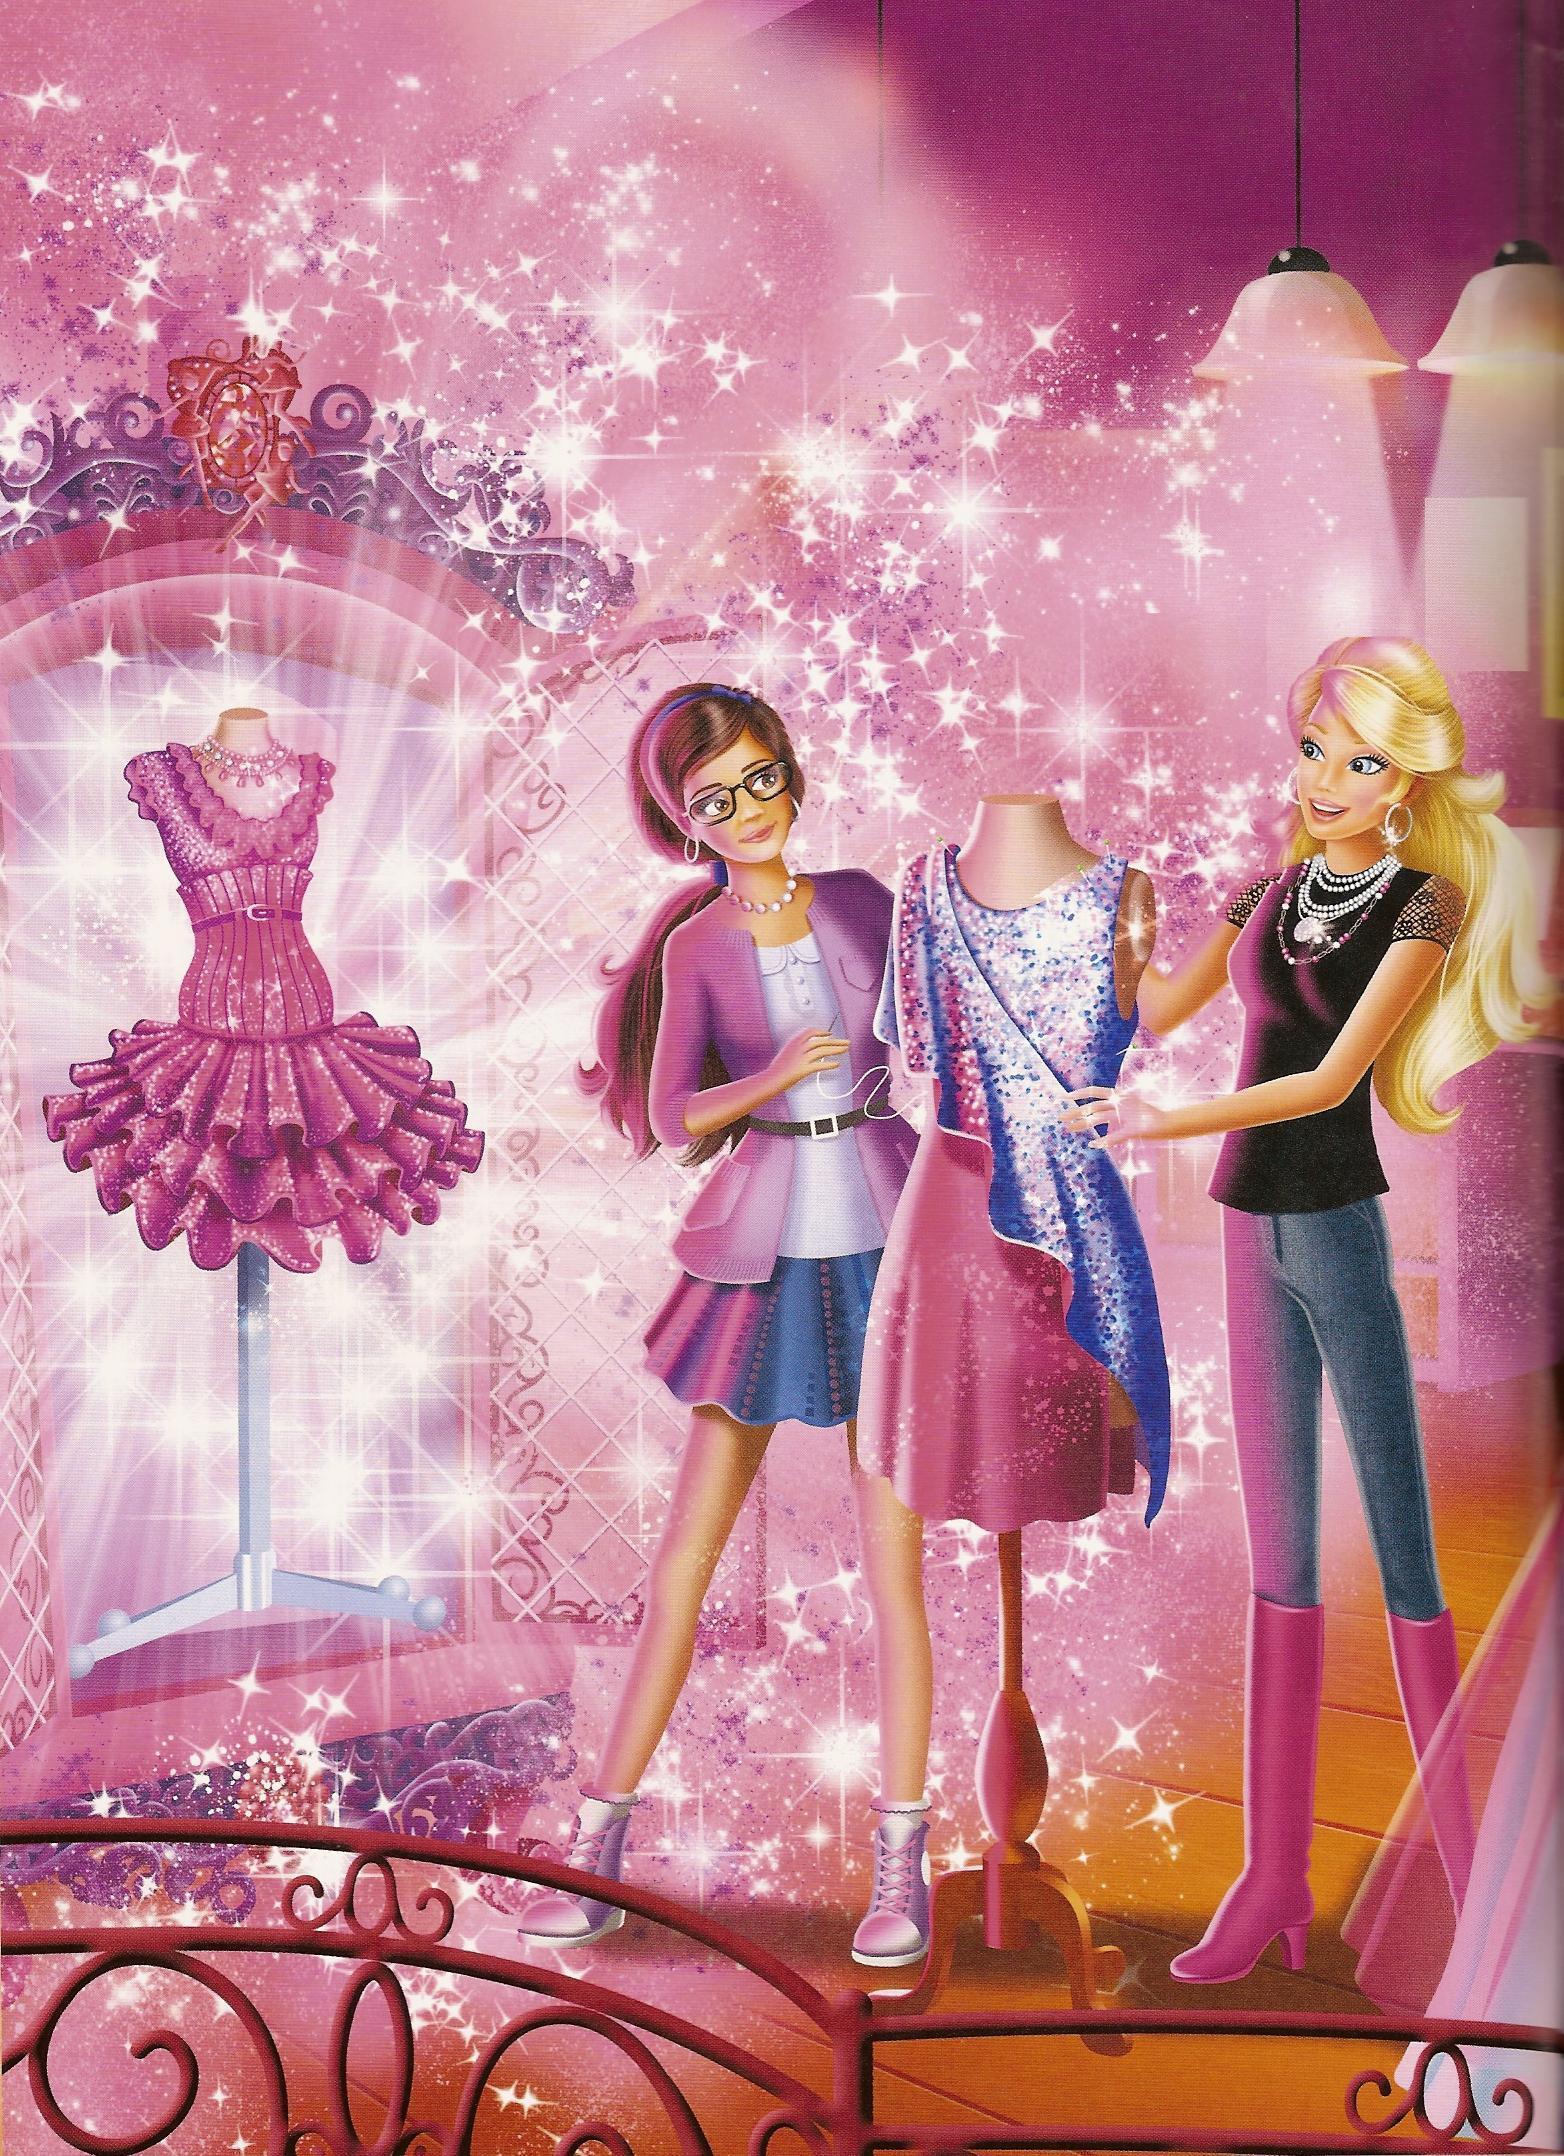 Barbie Fashion Fairytale image barbie HD wallpaper and background